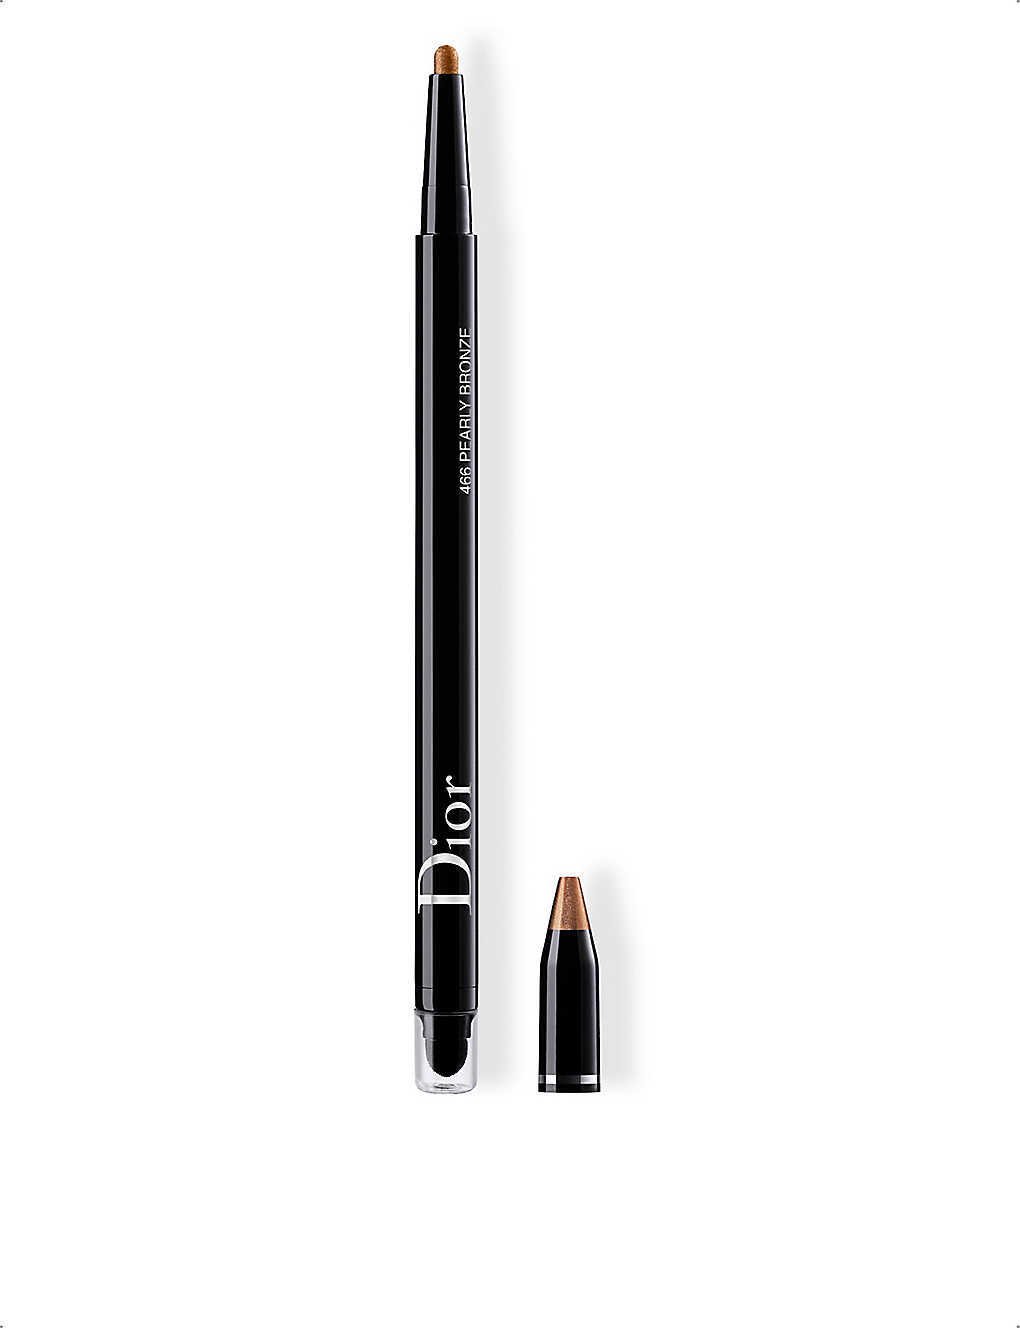 Dior Show 24h Stylo Waterproof Eyeliner 0.2g In 466 Pearly Bronze